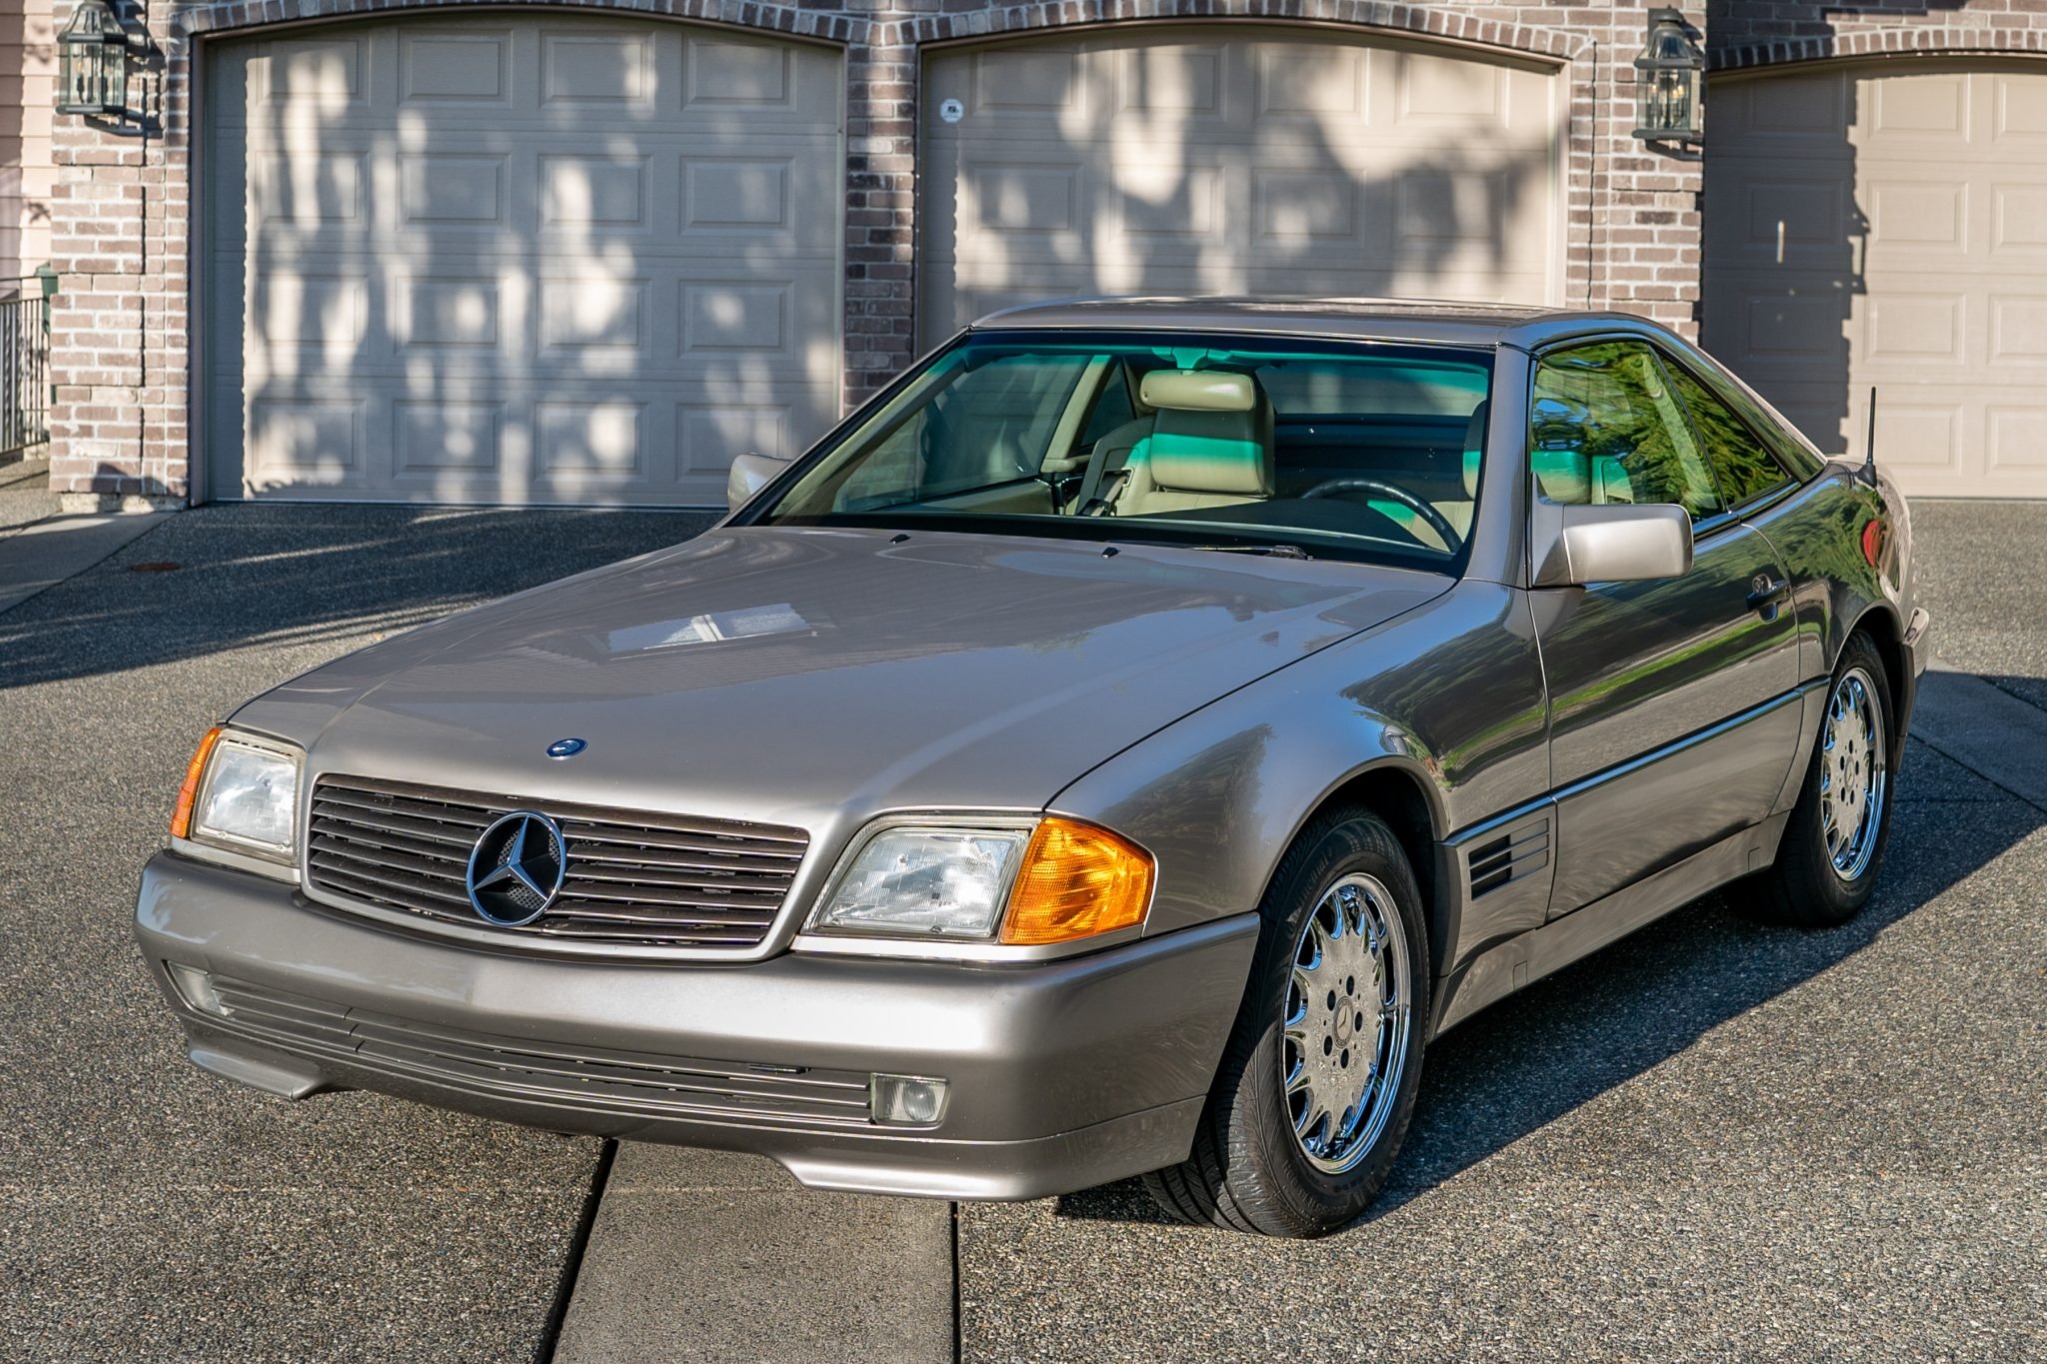 Used 1994 Mercedes-Benz SL500 Review